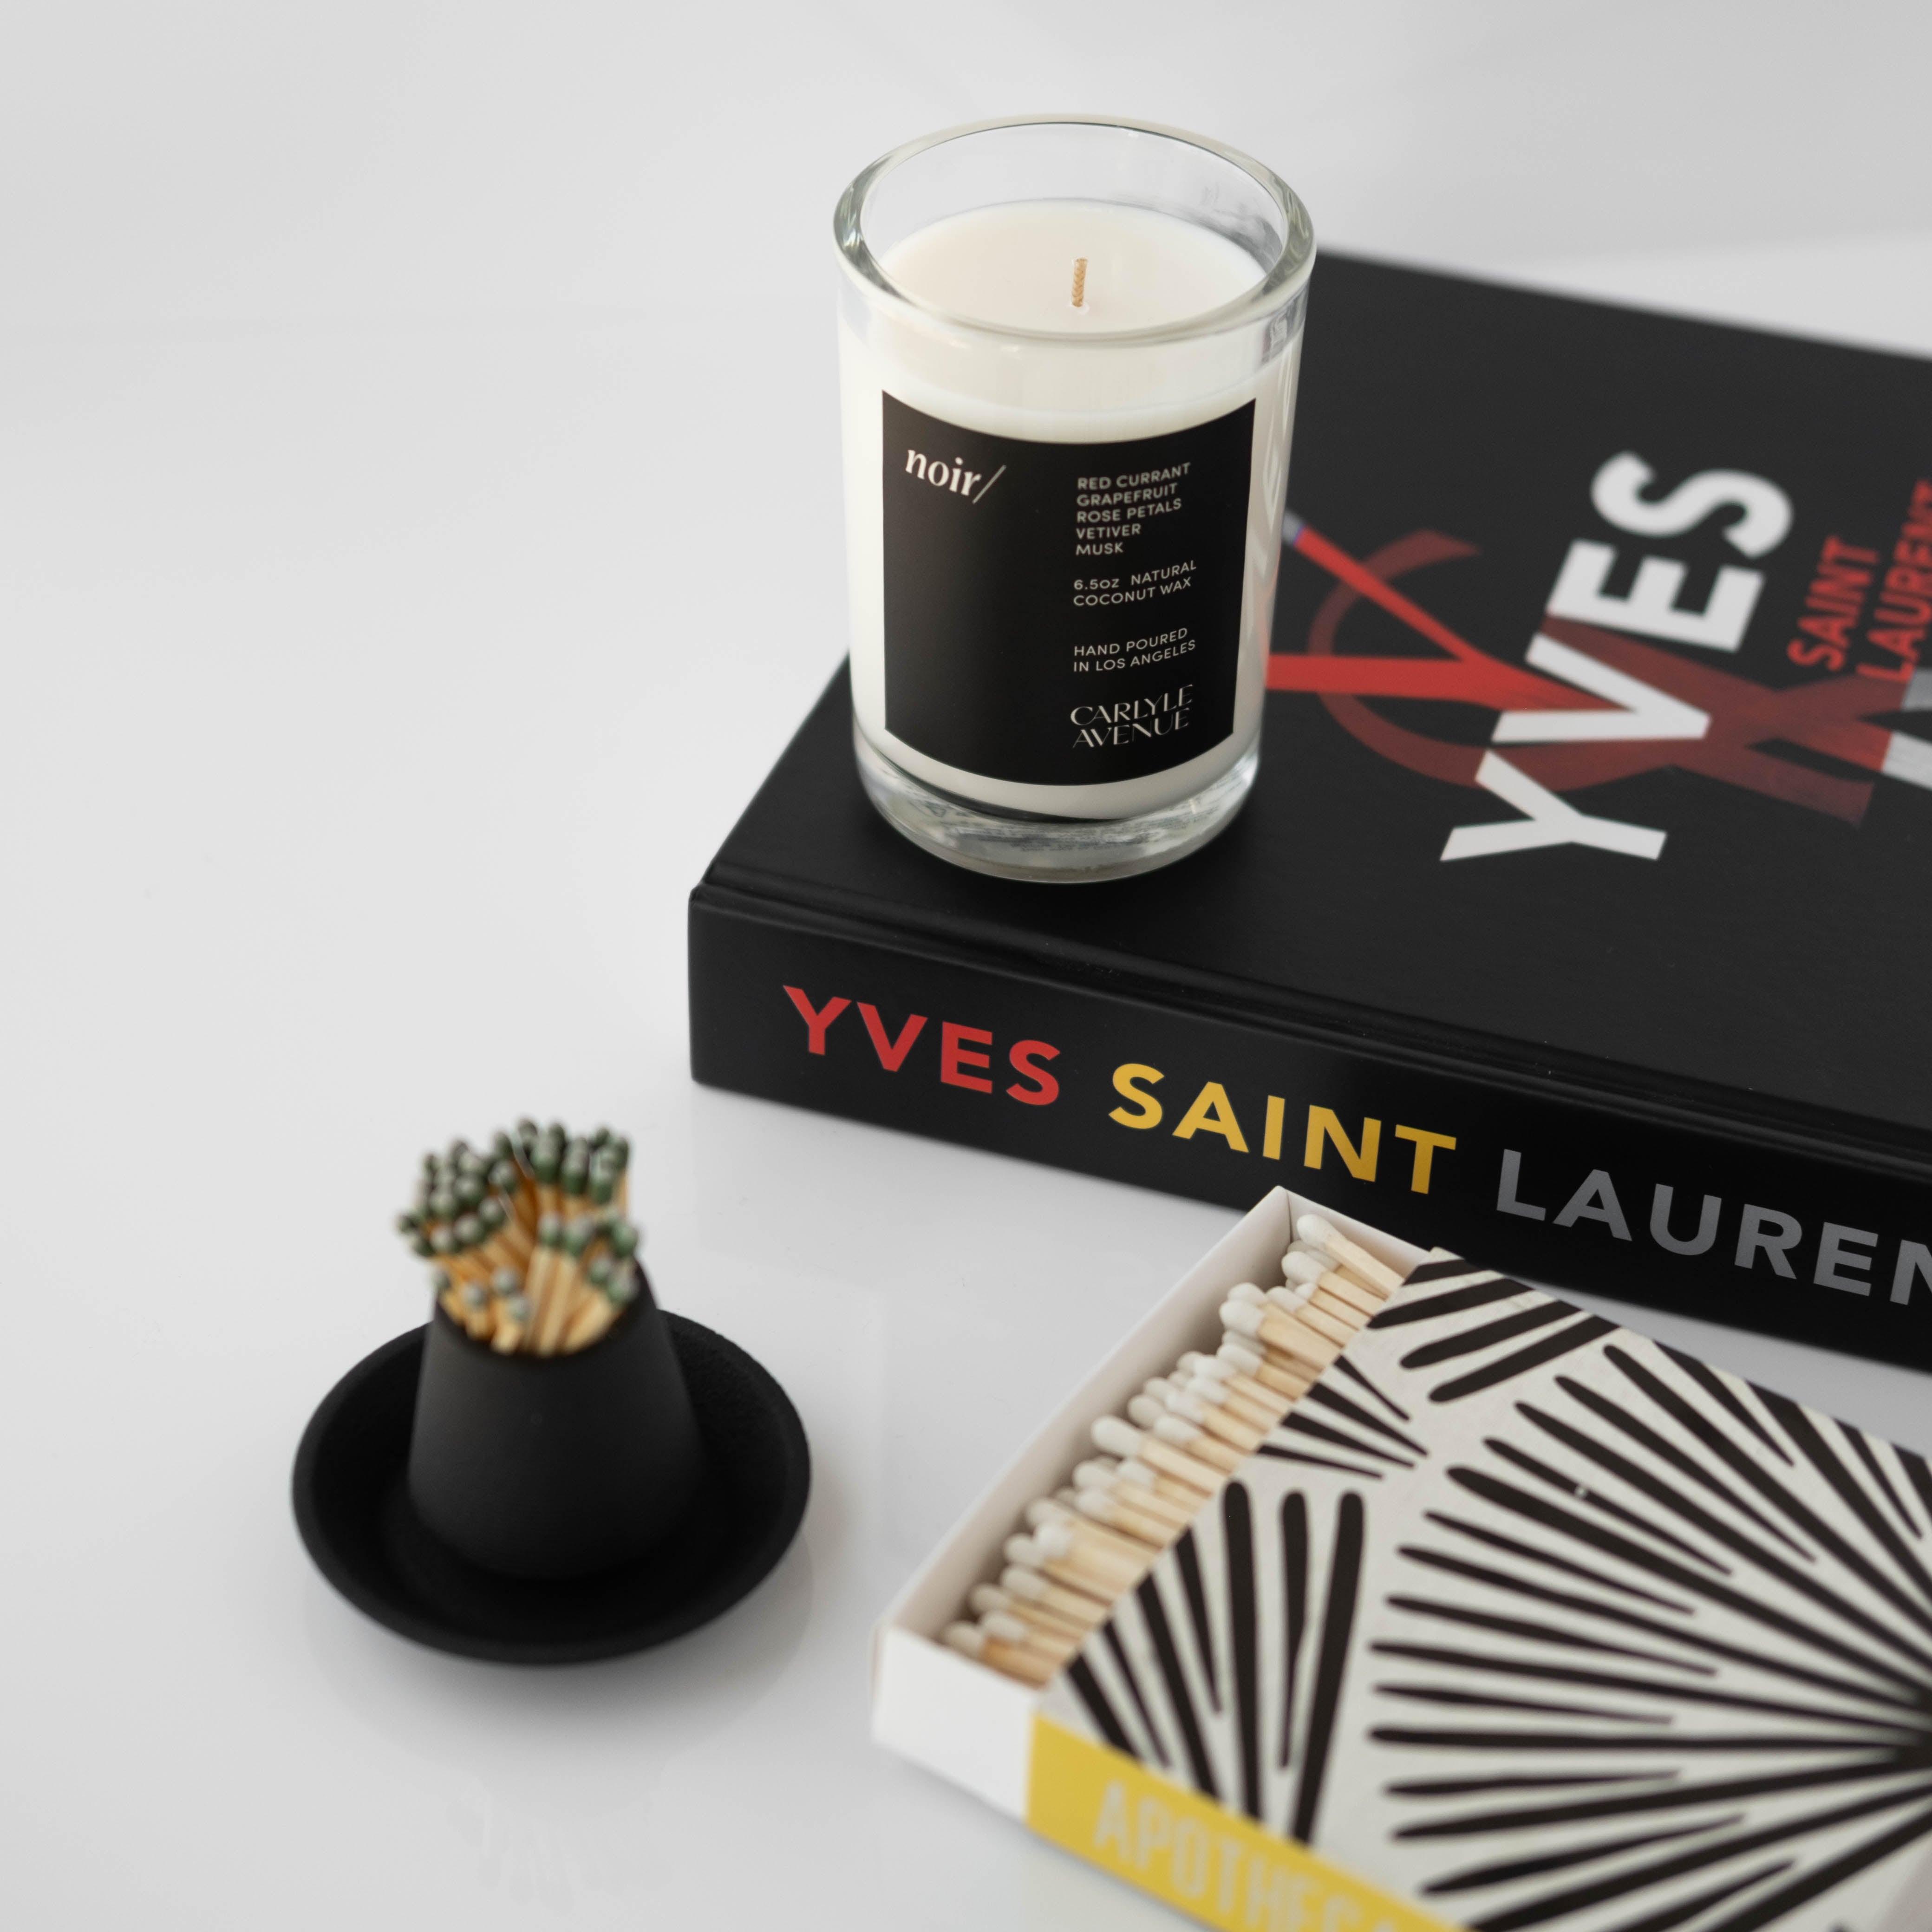 Carlyle Avenue Scented Candle - Noir